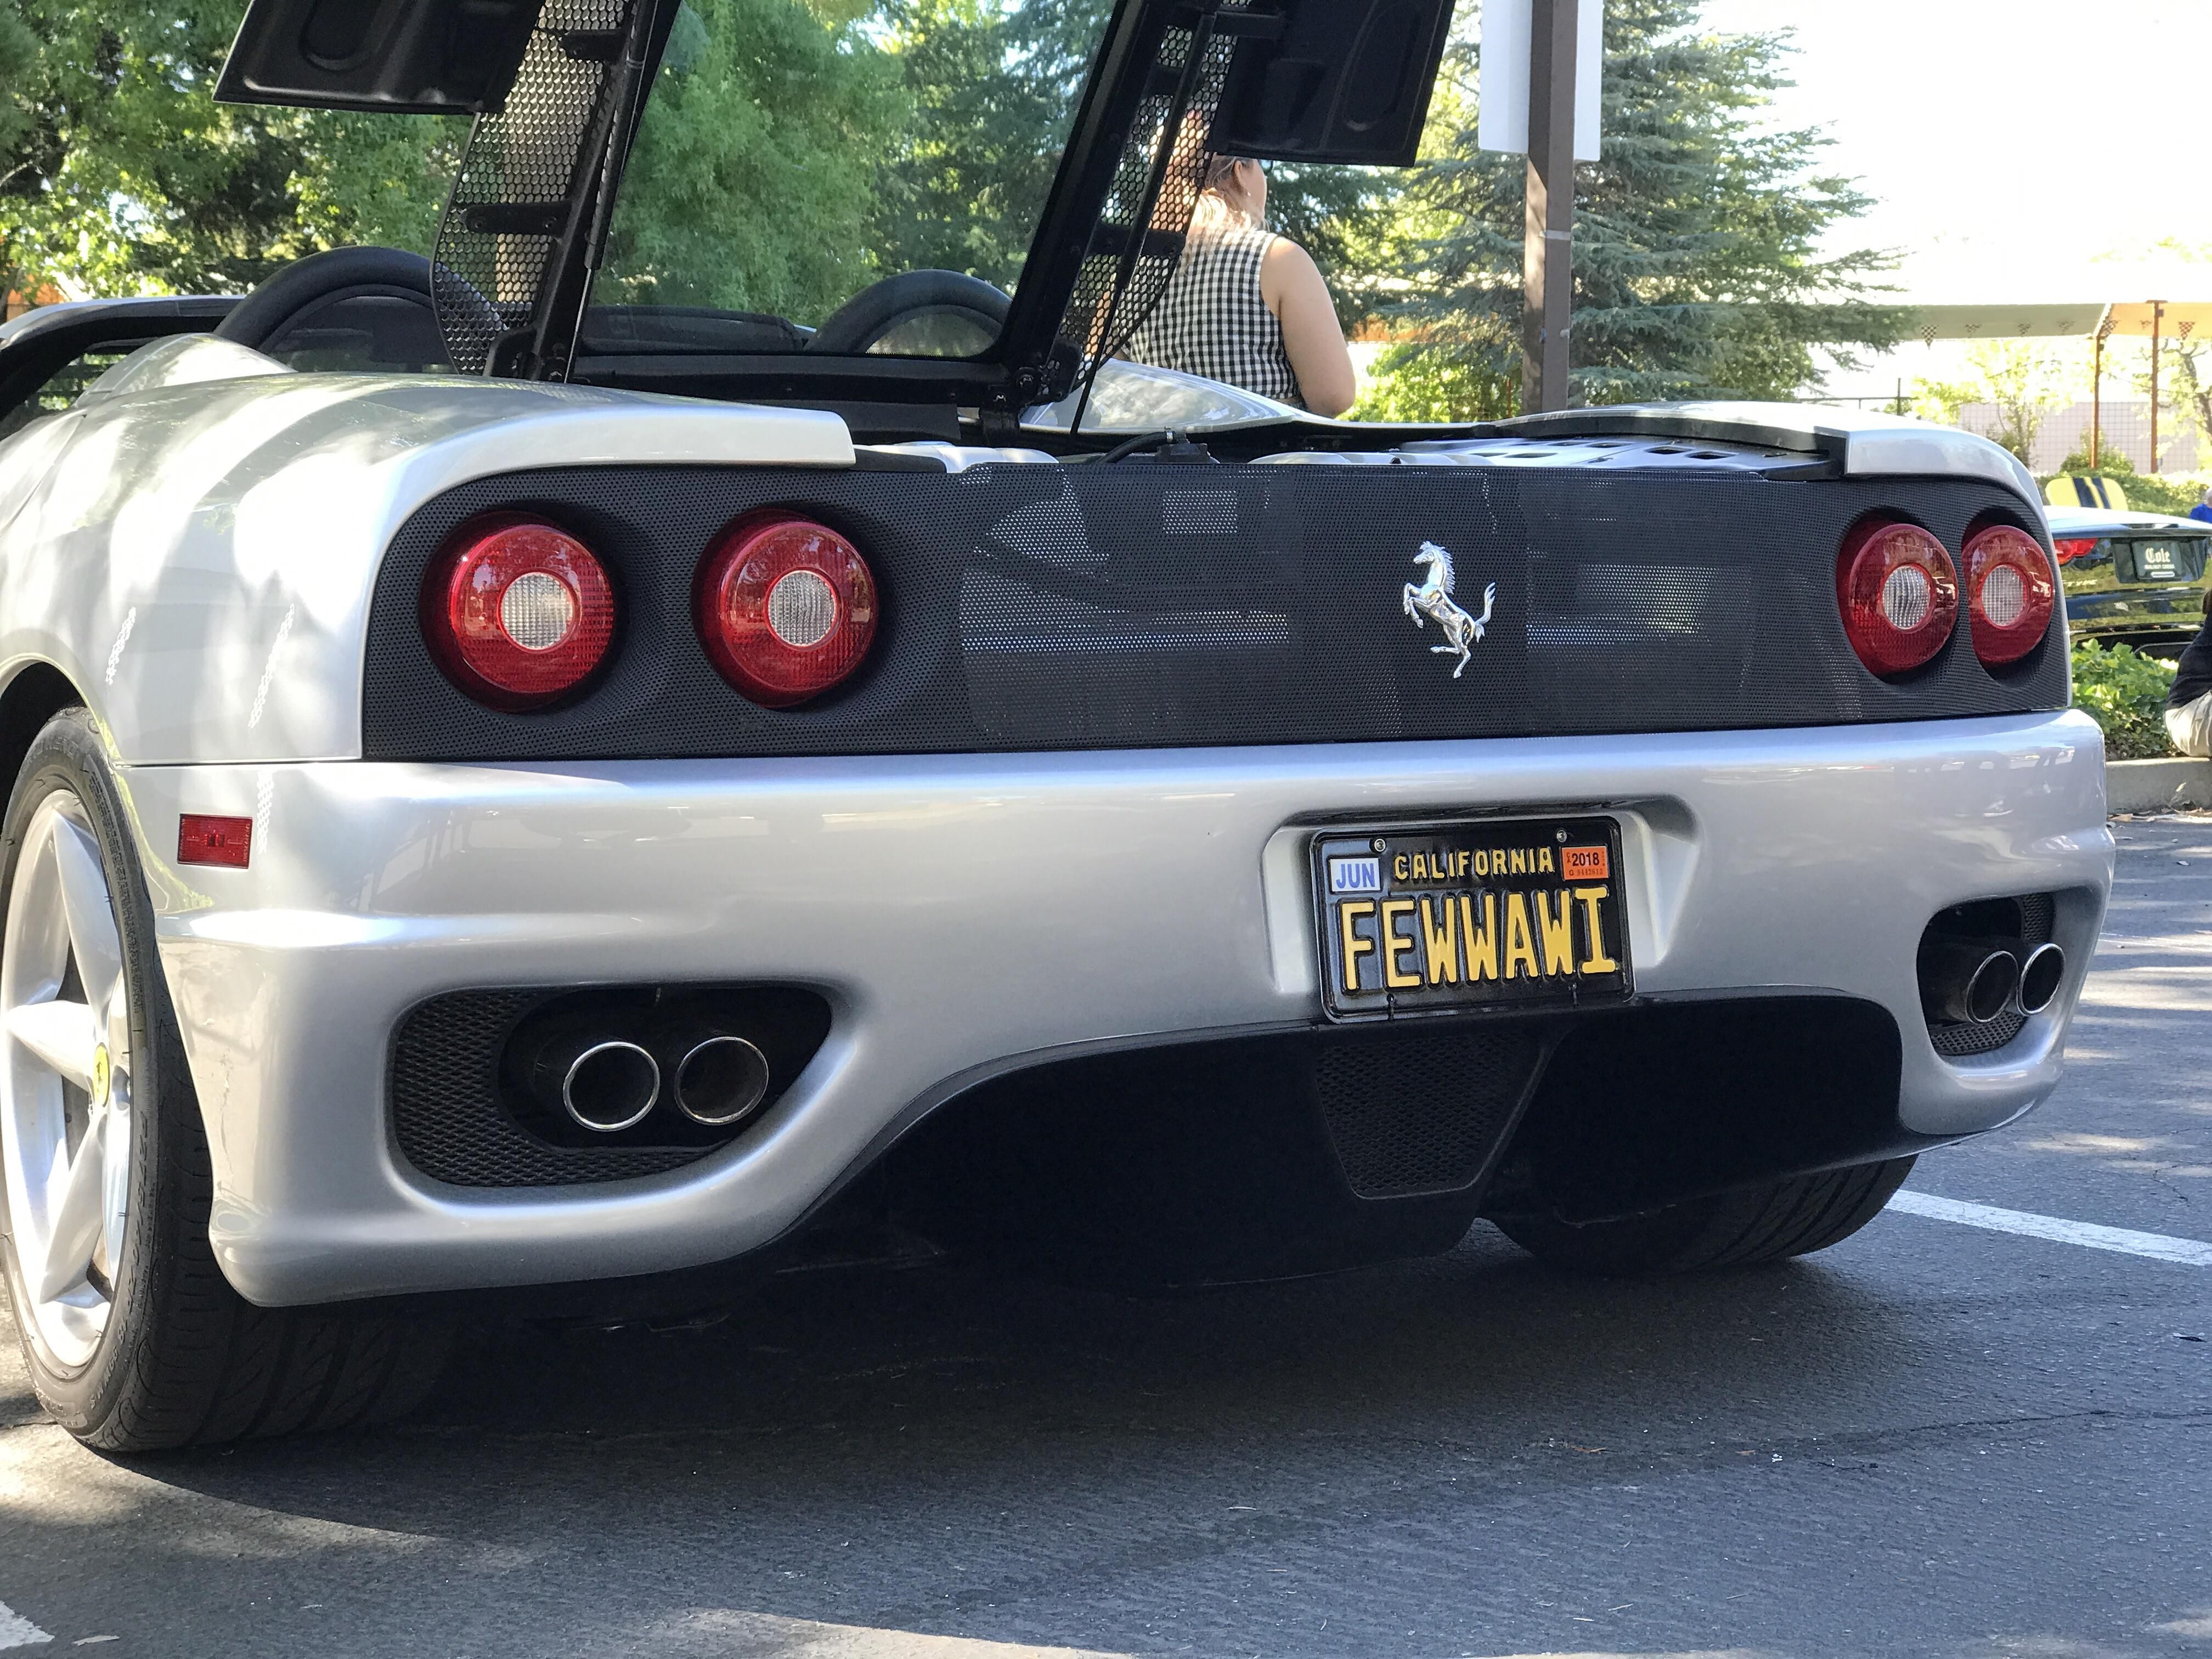 Yes, he was Asian. Yes, he had a great sense of humor. Yes, it's a Ferrari.